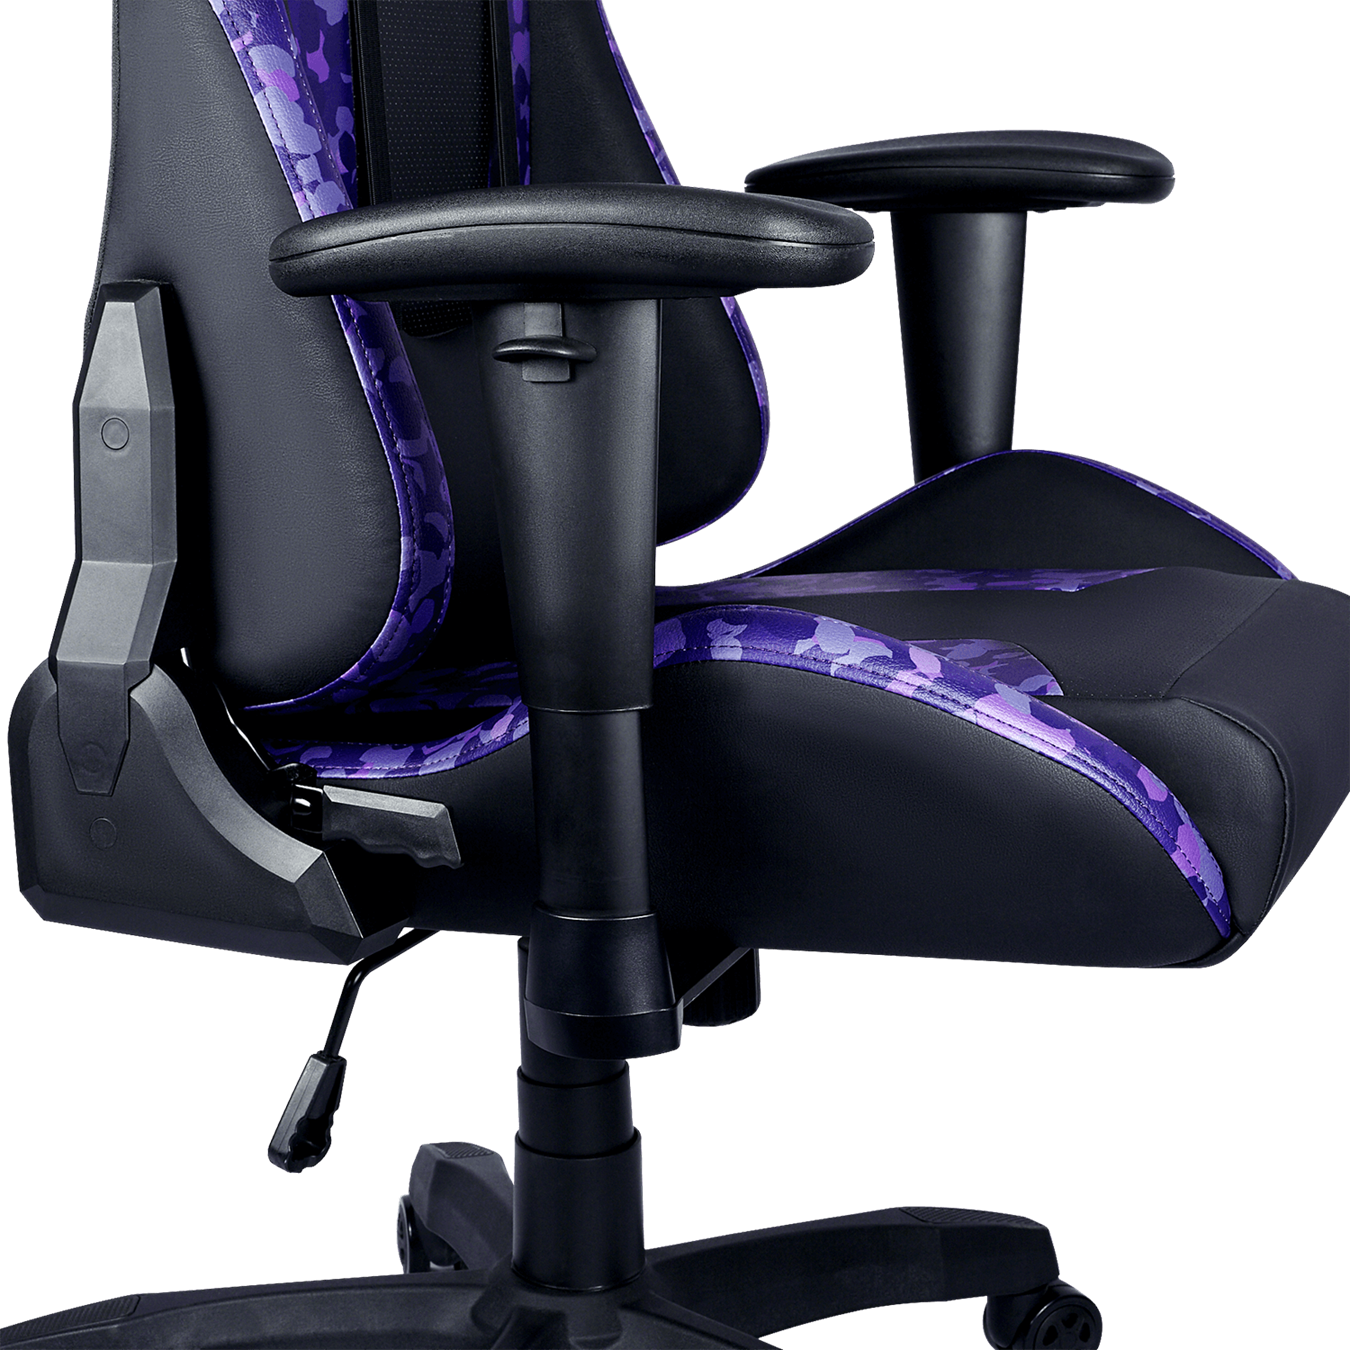 Caliber R1S CAMO Gaming Chair - Premium quality and design sets you apart from the competition. The breathable PU provides maximum comfort for all body types and keeps you feeling cool and energized at all times.